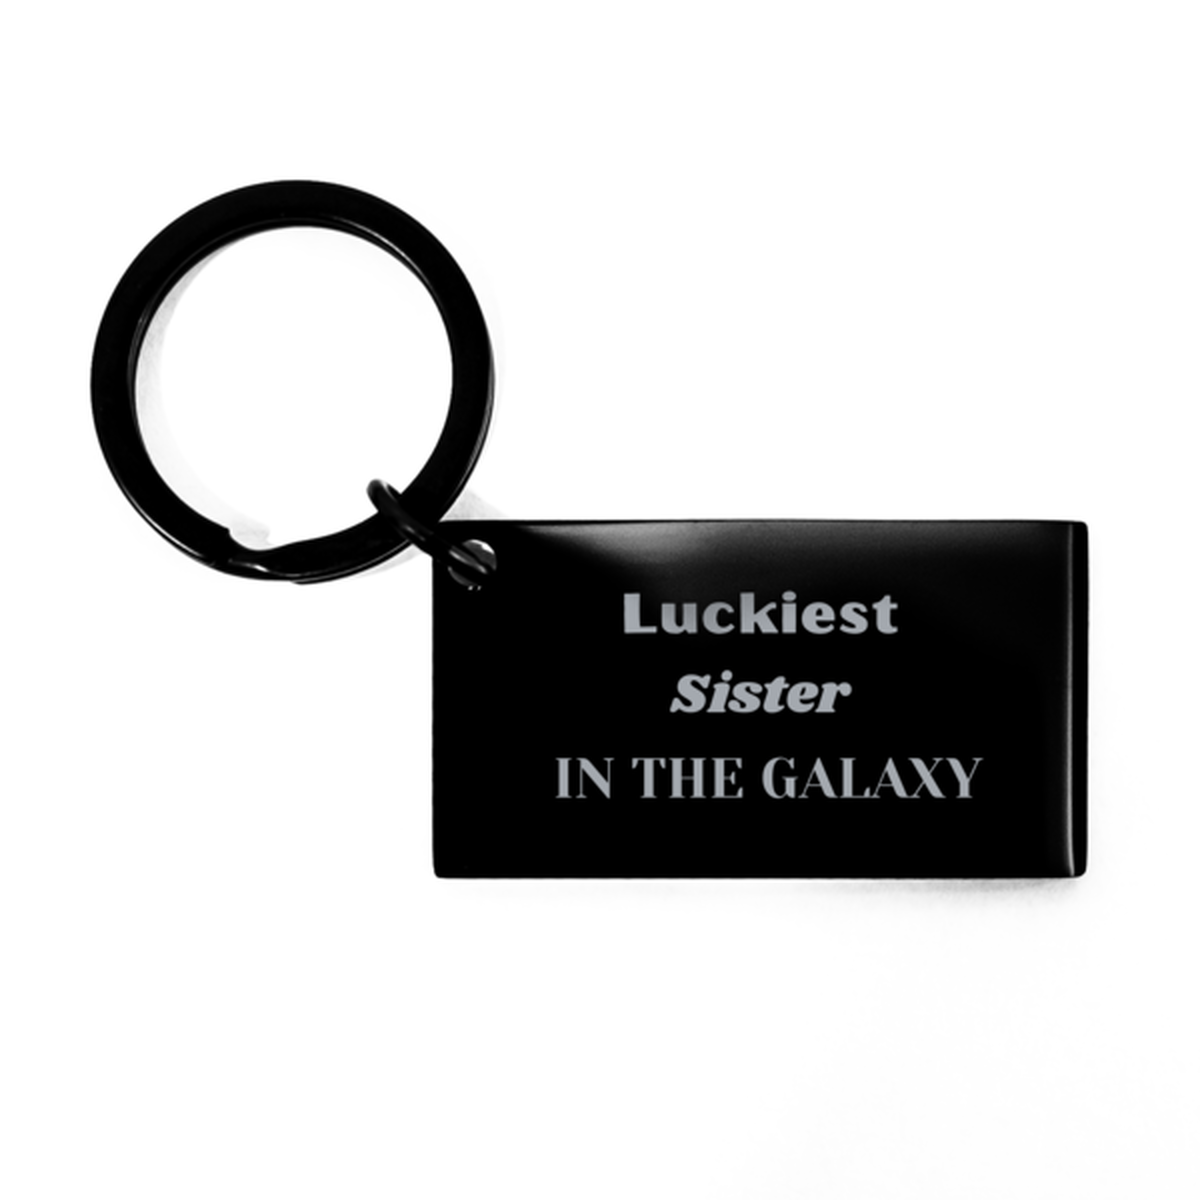 Luckiest Sister in the Galaxy, To My Sister Engraved Gifts, Christmas Sister Keychain Gifts, X-mas Birthday Unique Gifts For Sister Men Women